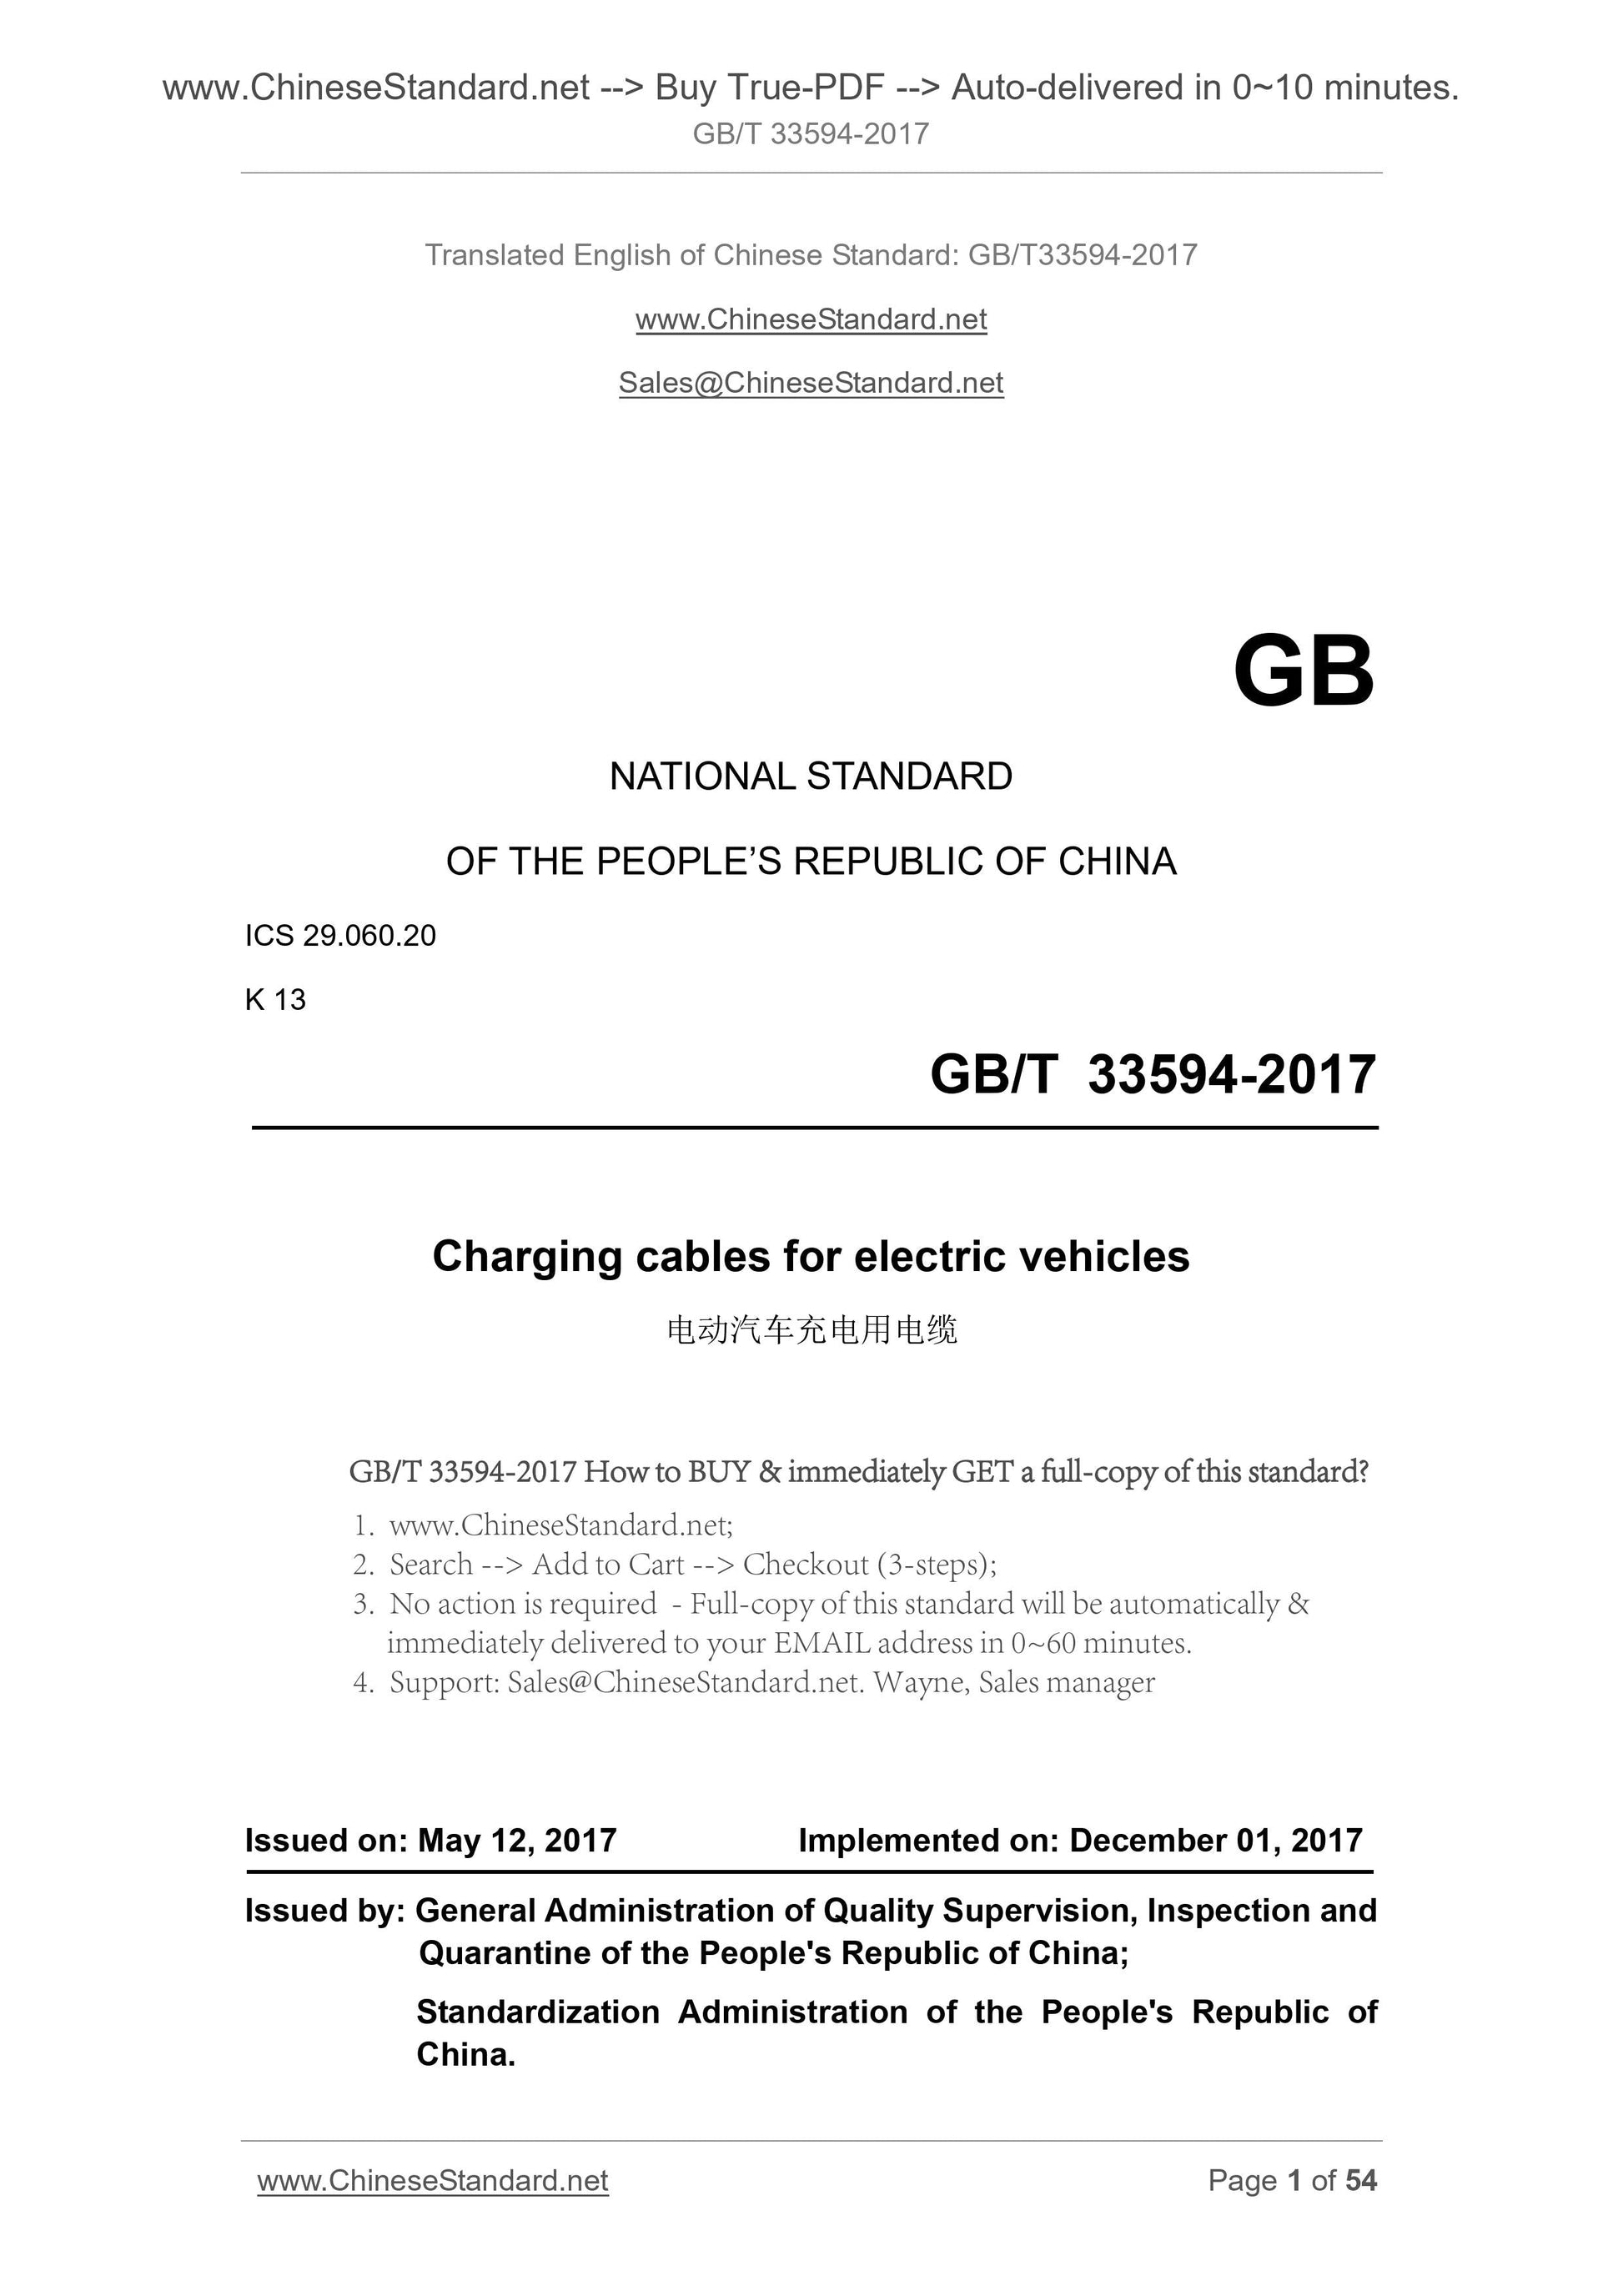 GB/T 33594-2017 Page 1